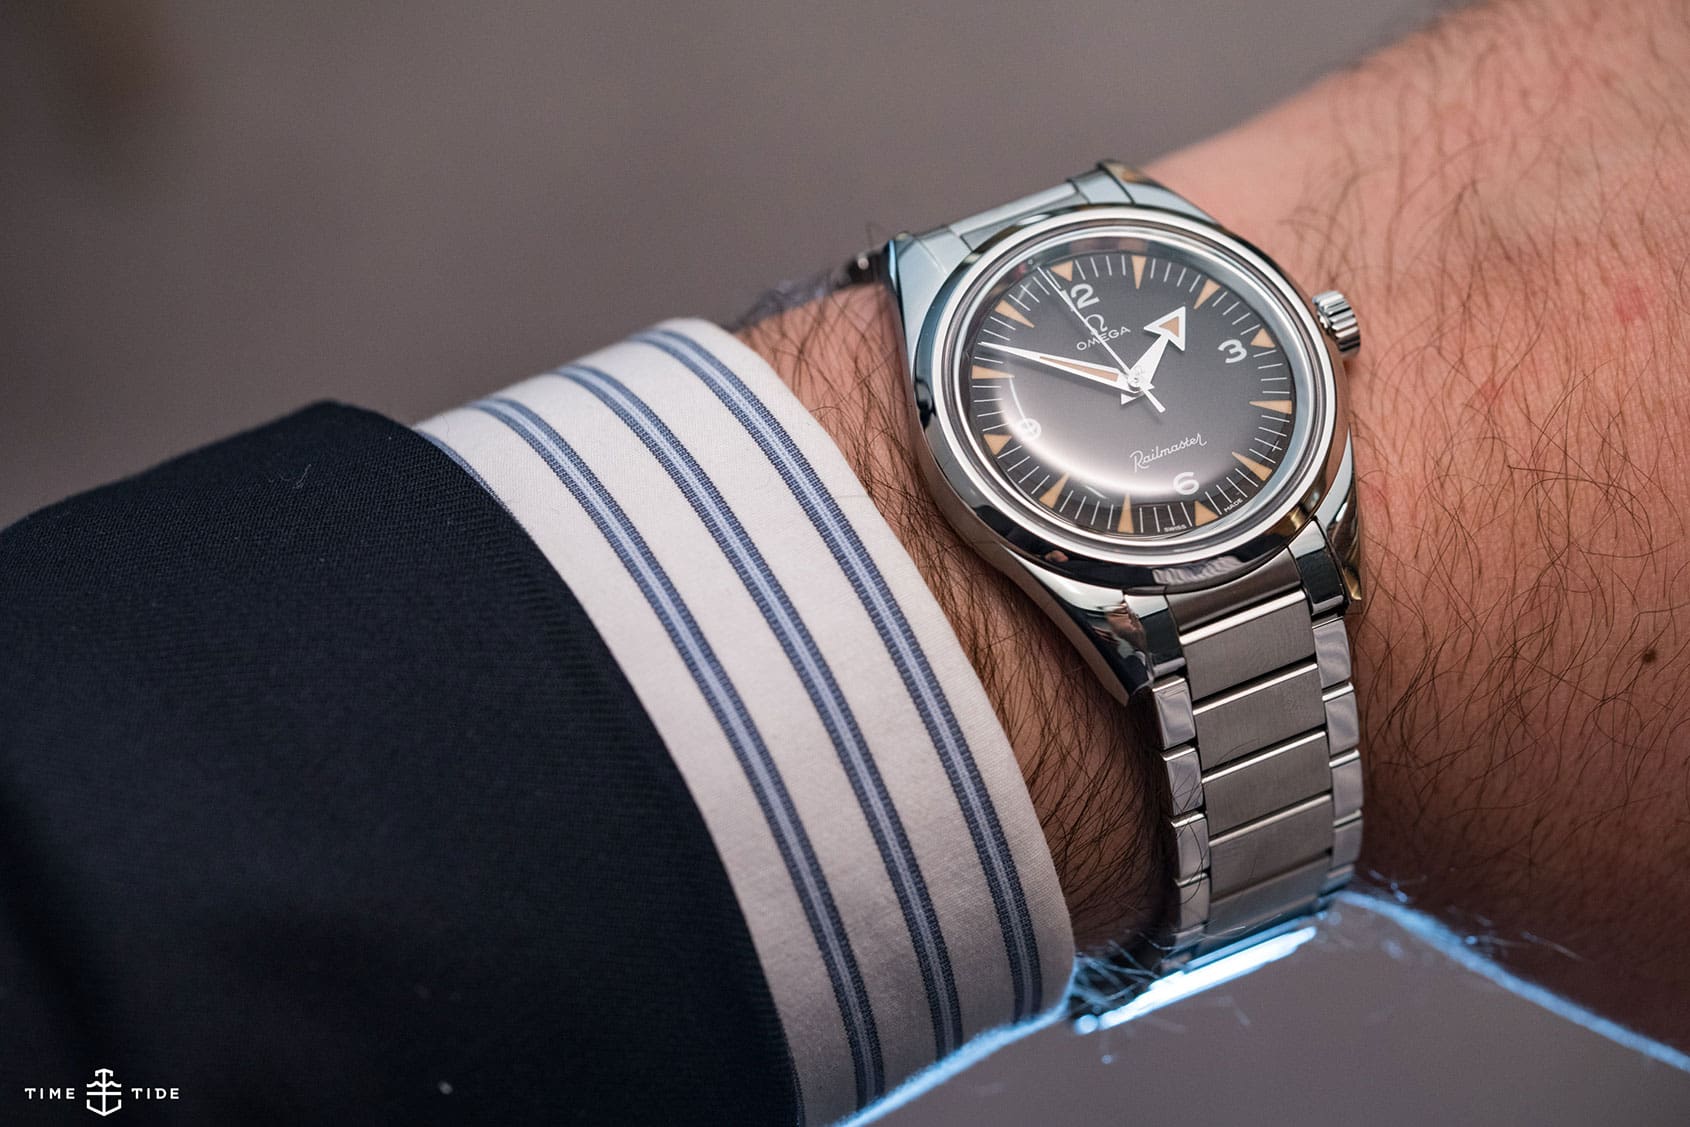 Is the Omega 1957 Trilogy Railmaster better than the original?